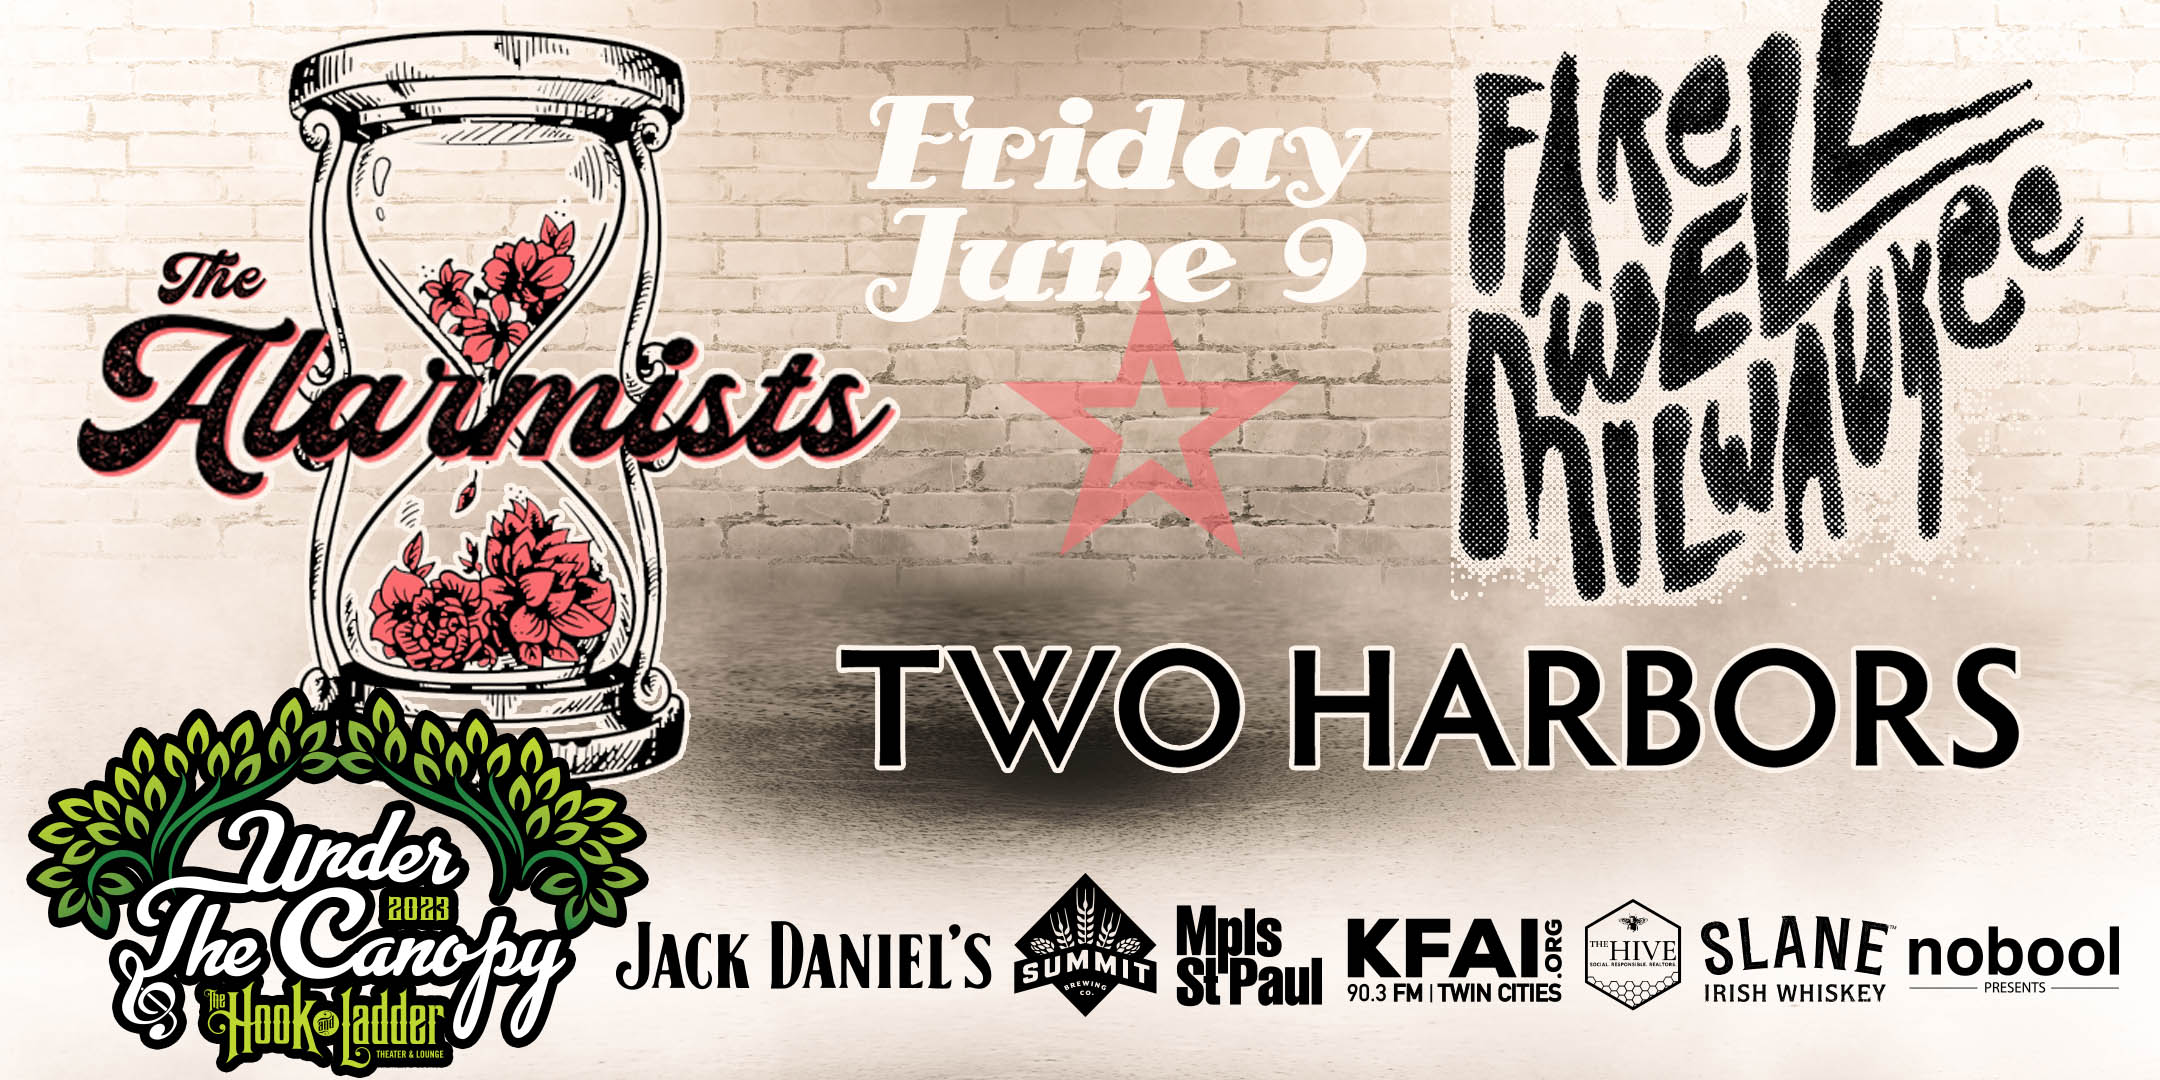 The Alarmists Farewell Milwaukee Two Harbors Friday, June 9 Under The Canopy at The Hook and Ladder Theater "An Urban Outdoor Summer Concert Series" Doors 6:00pm :: Music 7:00pm :: 21+ Reserved Seats: $32 GA: $16 ADV / $22 DOS